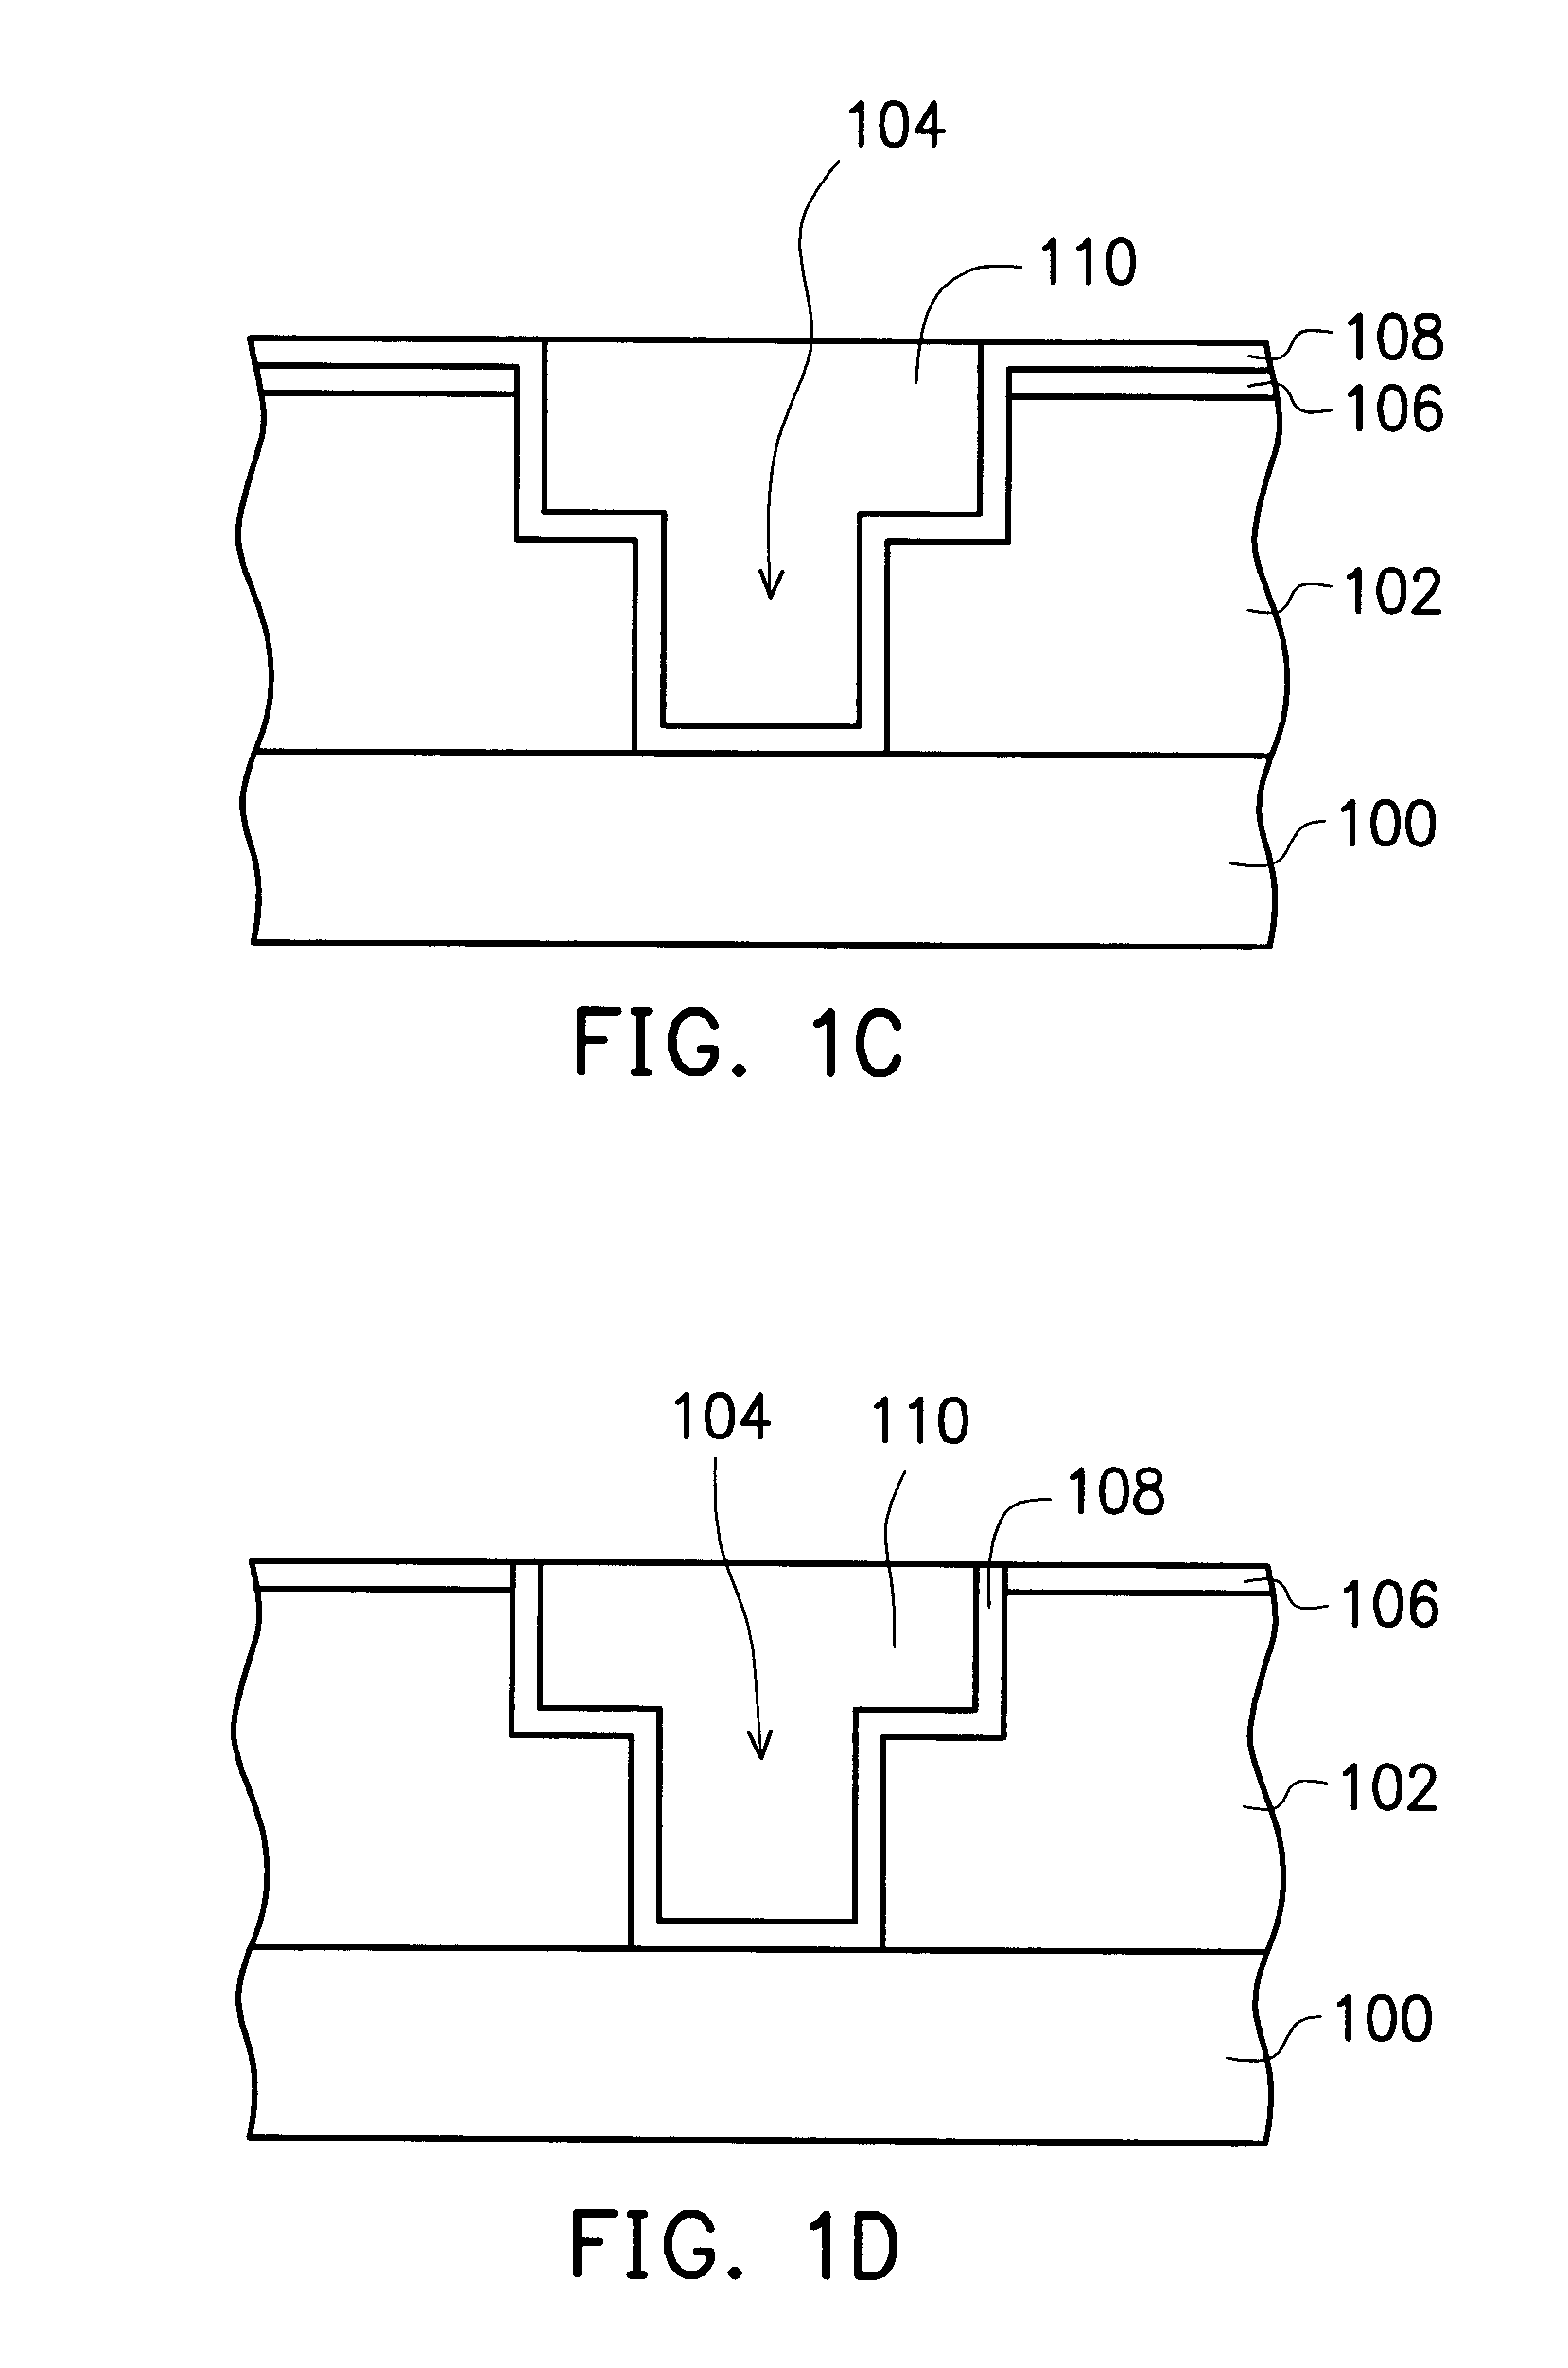 Method of removing contaminants from a silicon wafer after chemical-mechanical polishing operation